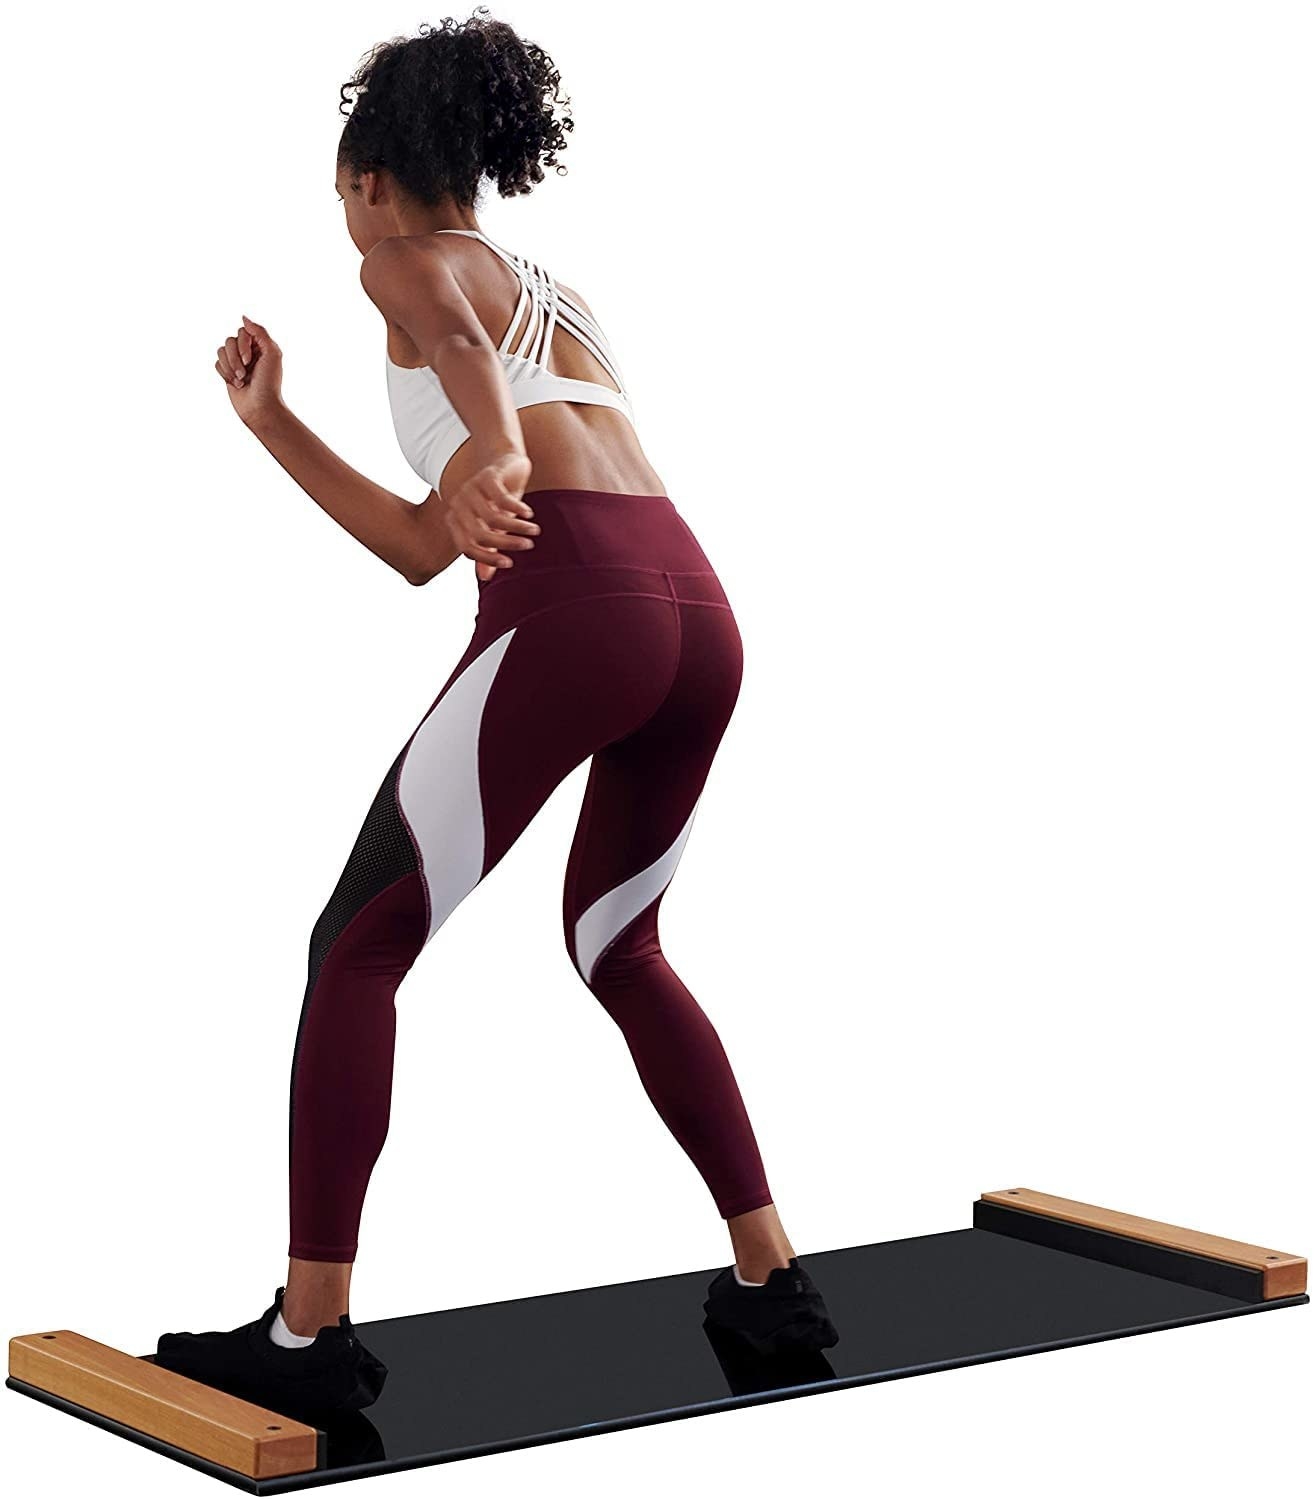 model with legs slightly bent and ready to move on the slide board